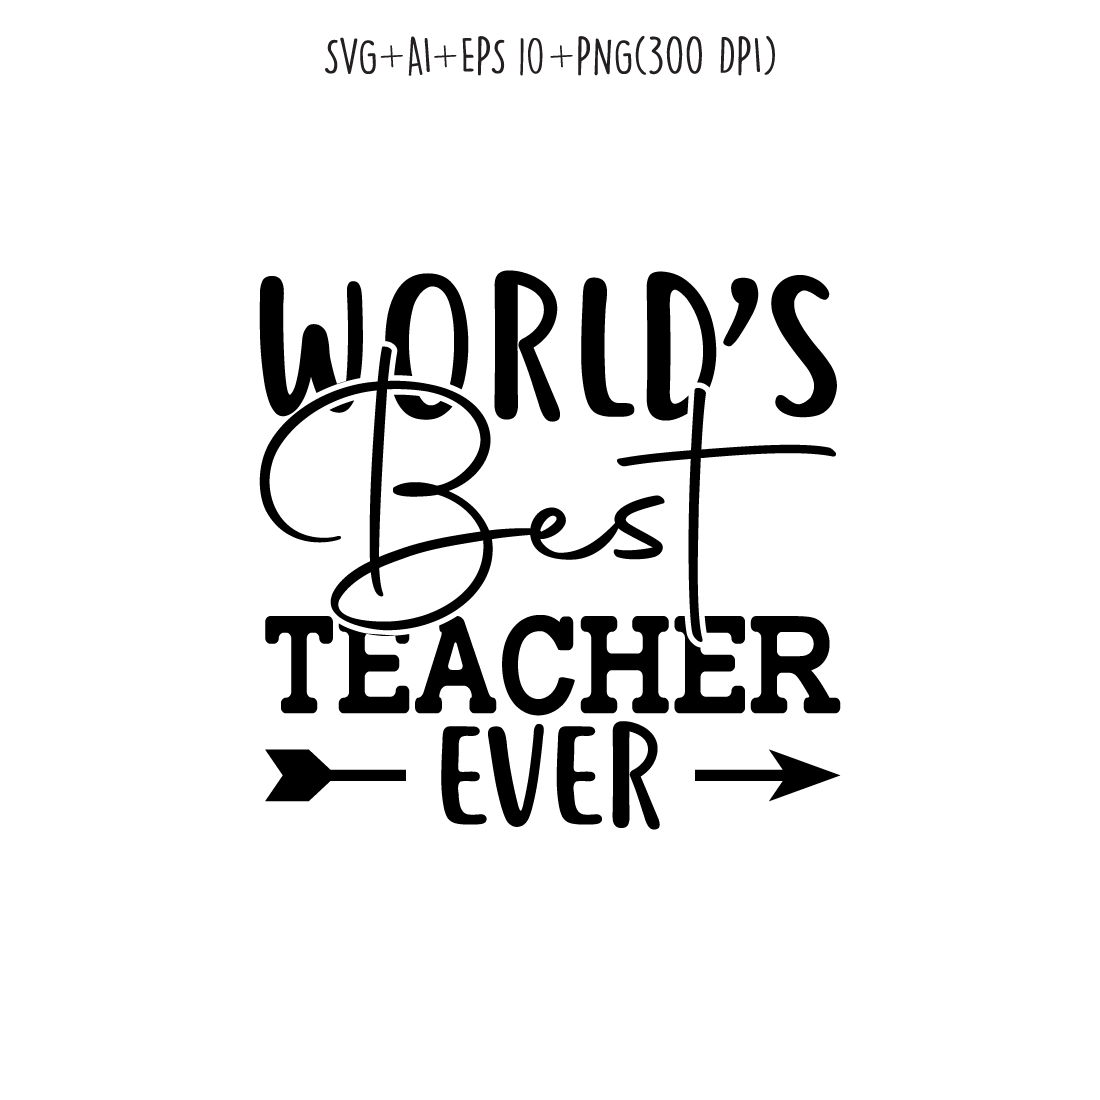 world’s best teacher ever SVG design for t-shirts, cards, frame artwork, phone cases, bags, mugs, stickers, tumblers, print, etc preview image.